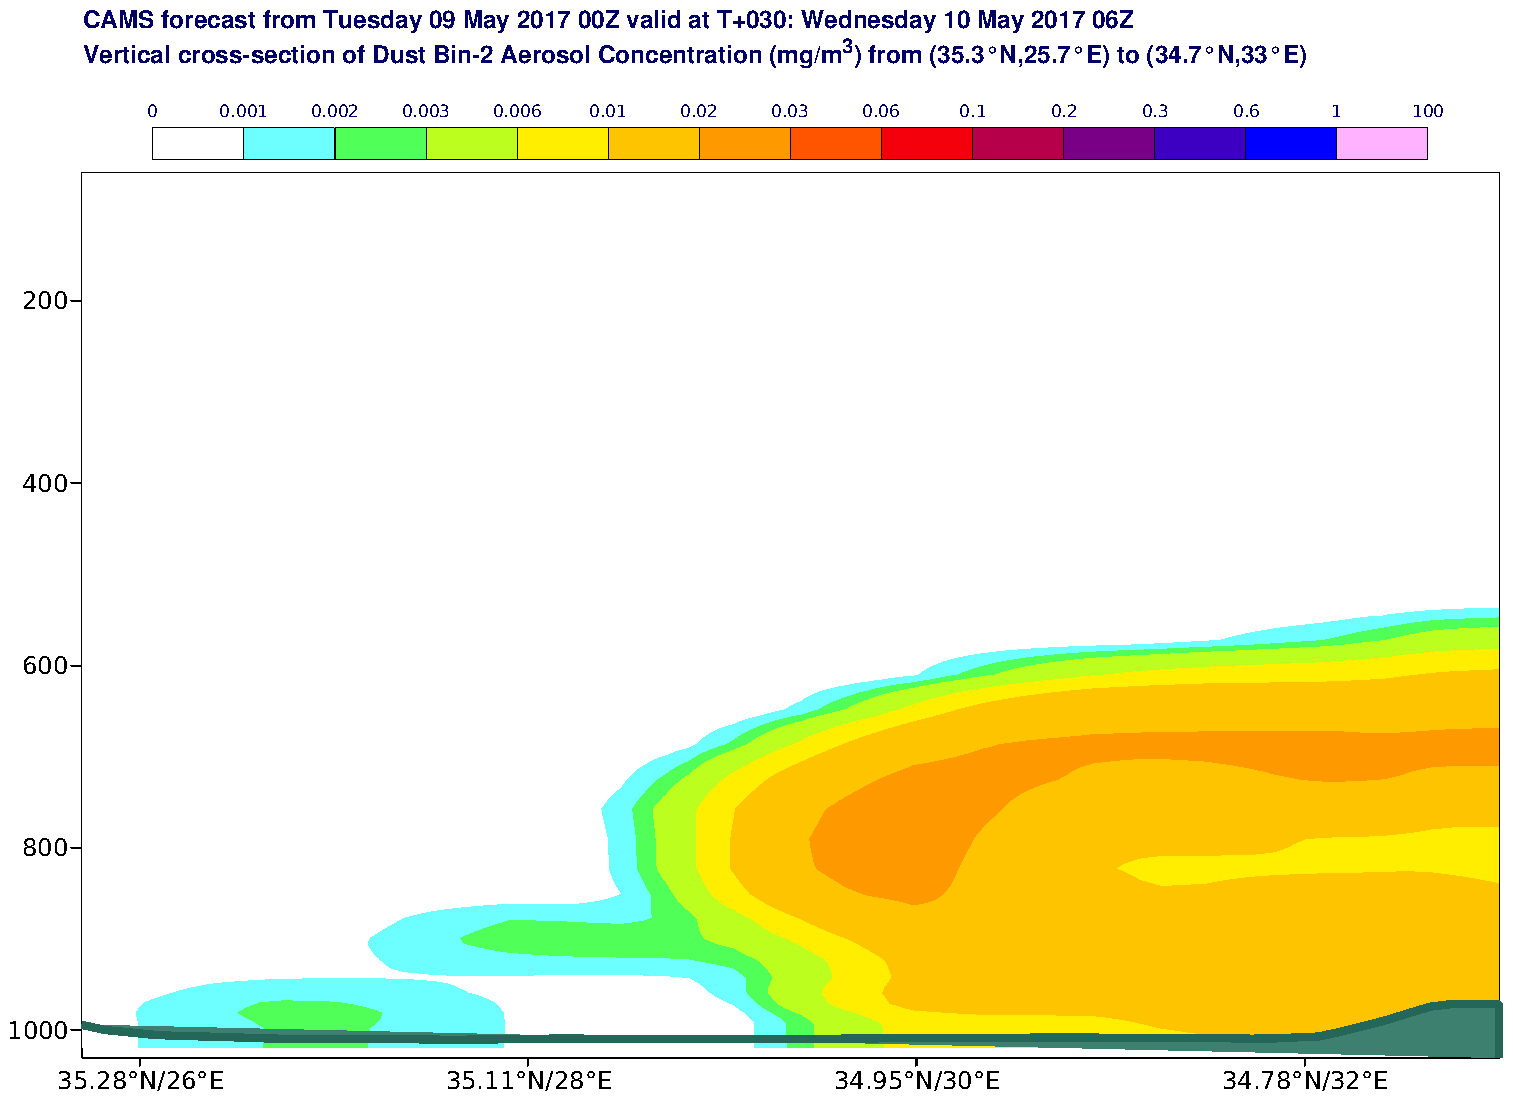 Vertical cross-section of Dust Bin-2 Aerosol Concentration (mg/m3) valid at T30 - 2017-05-10 06:00